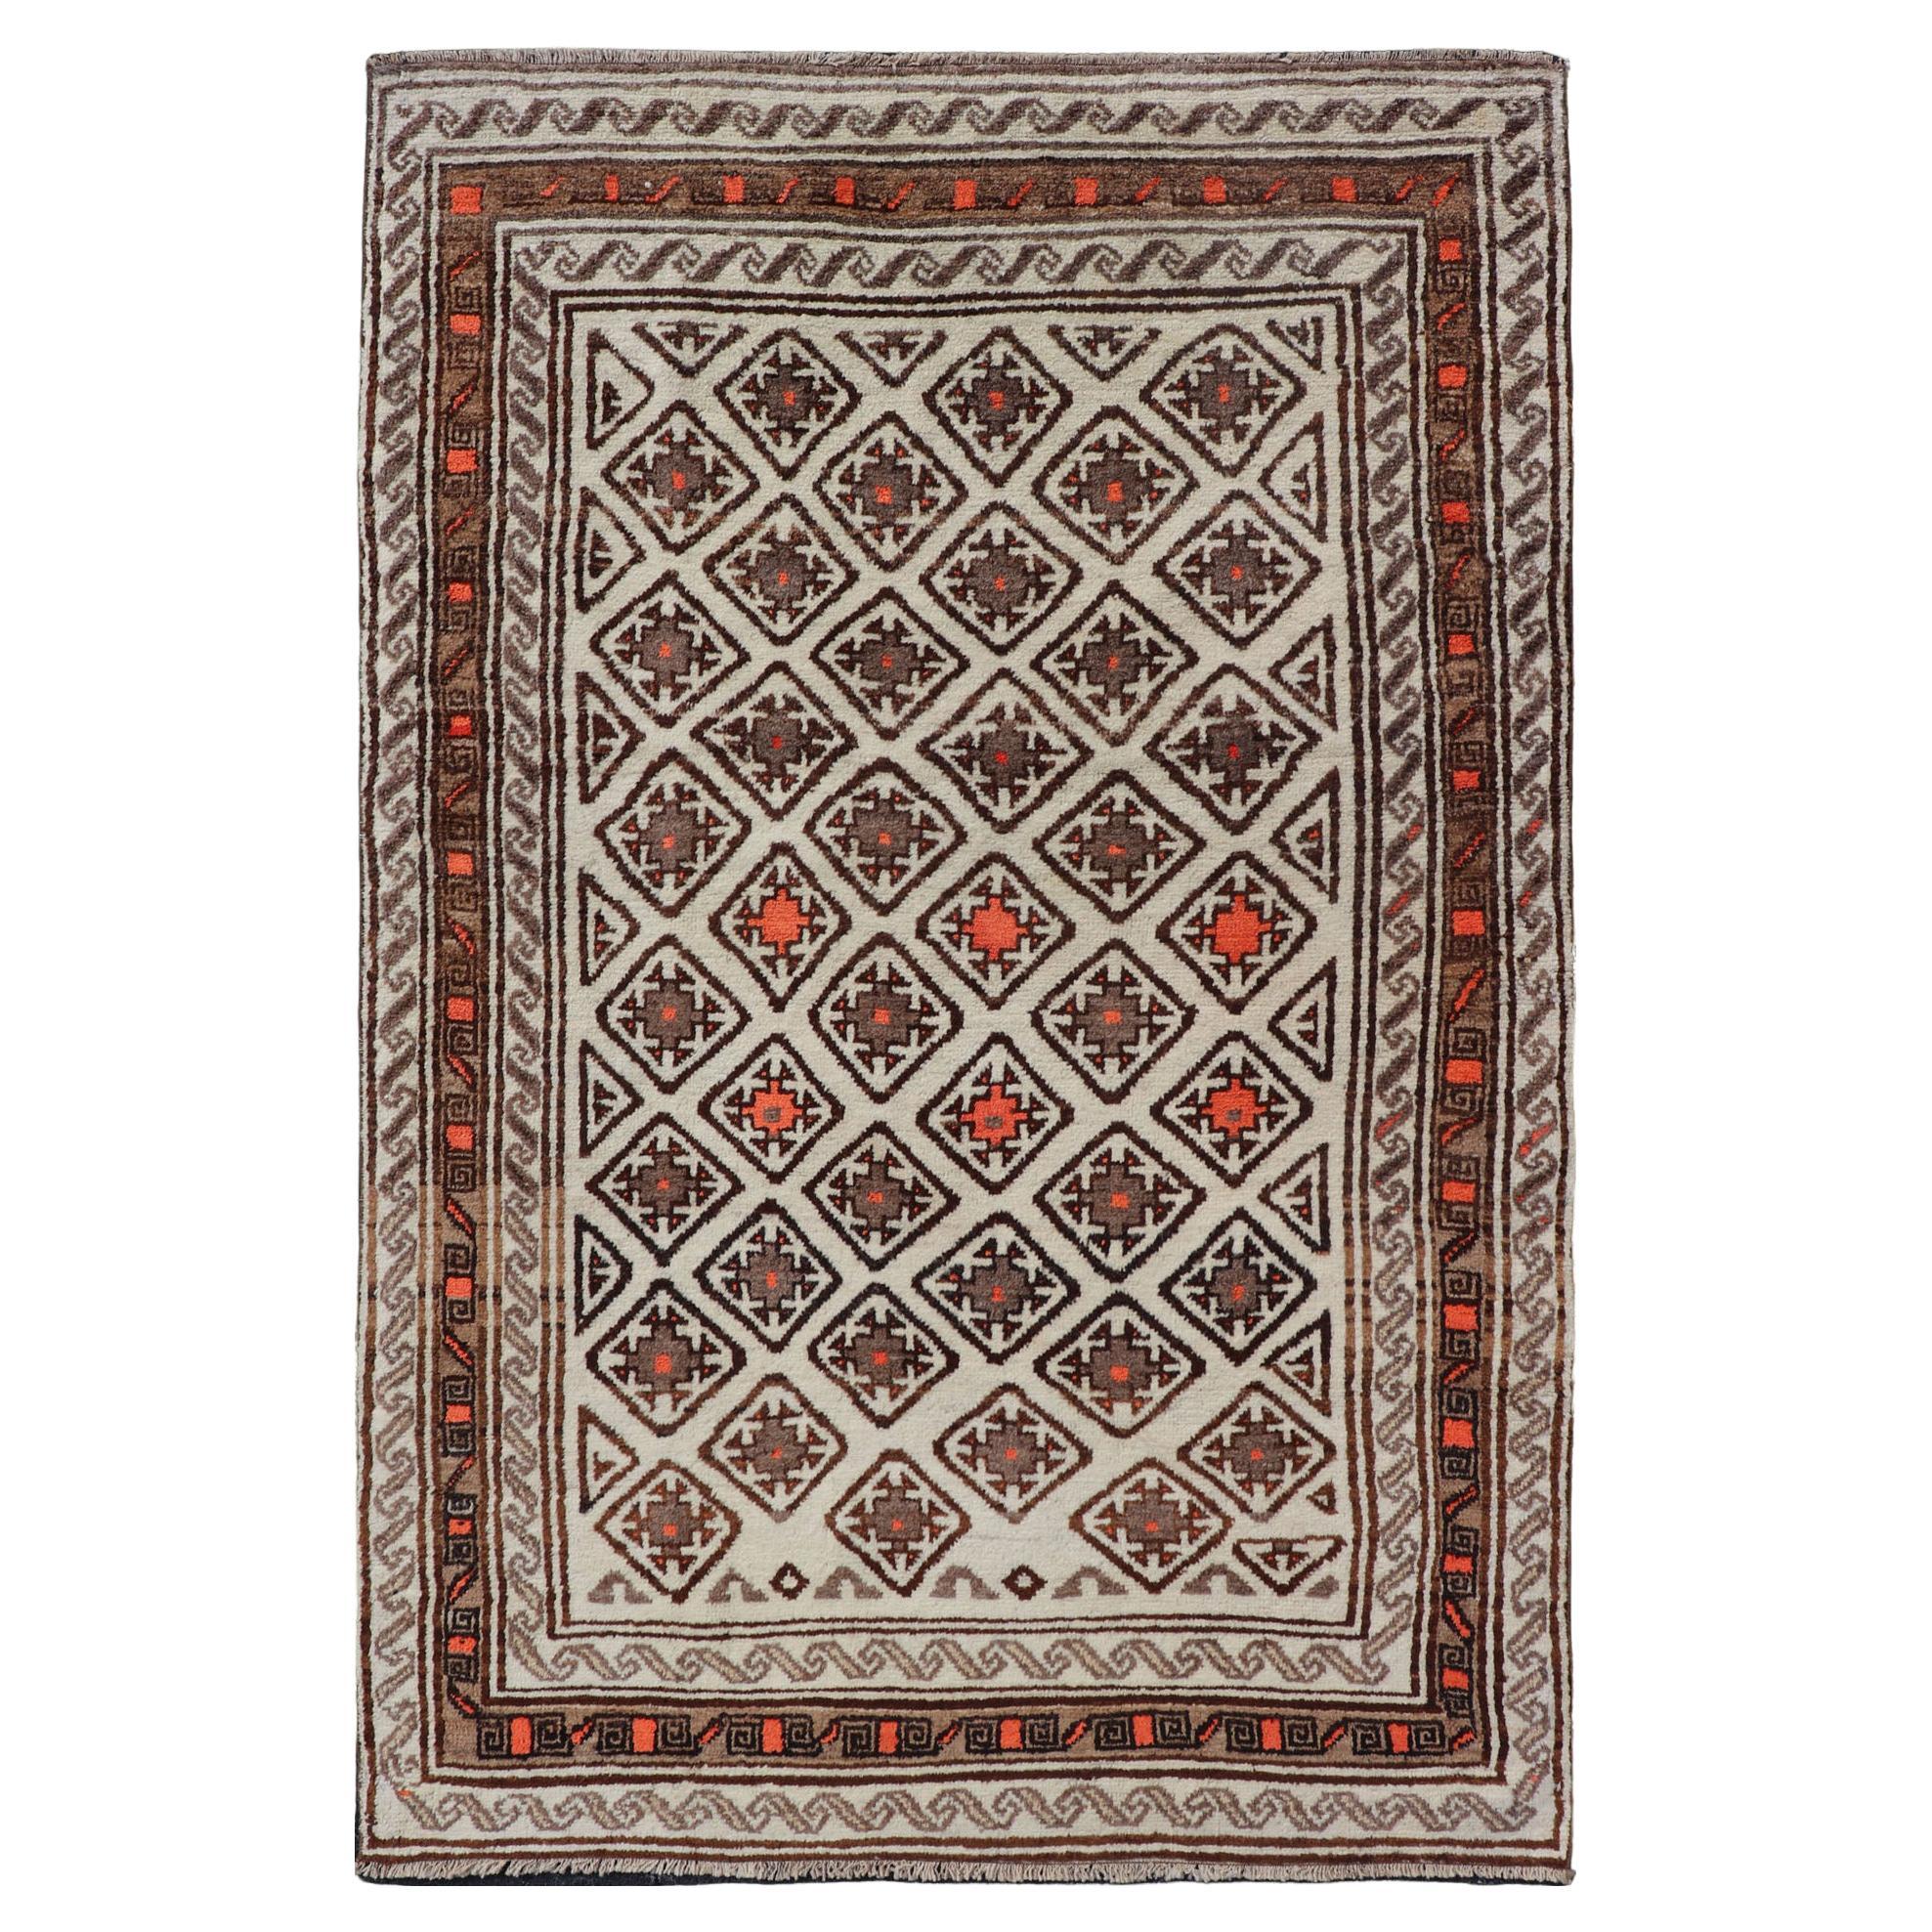 Antique Hand-Knotted Baluch Tribal Rug with All-Over Geometric Diamond Design For Sale